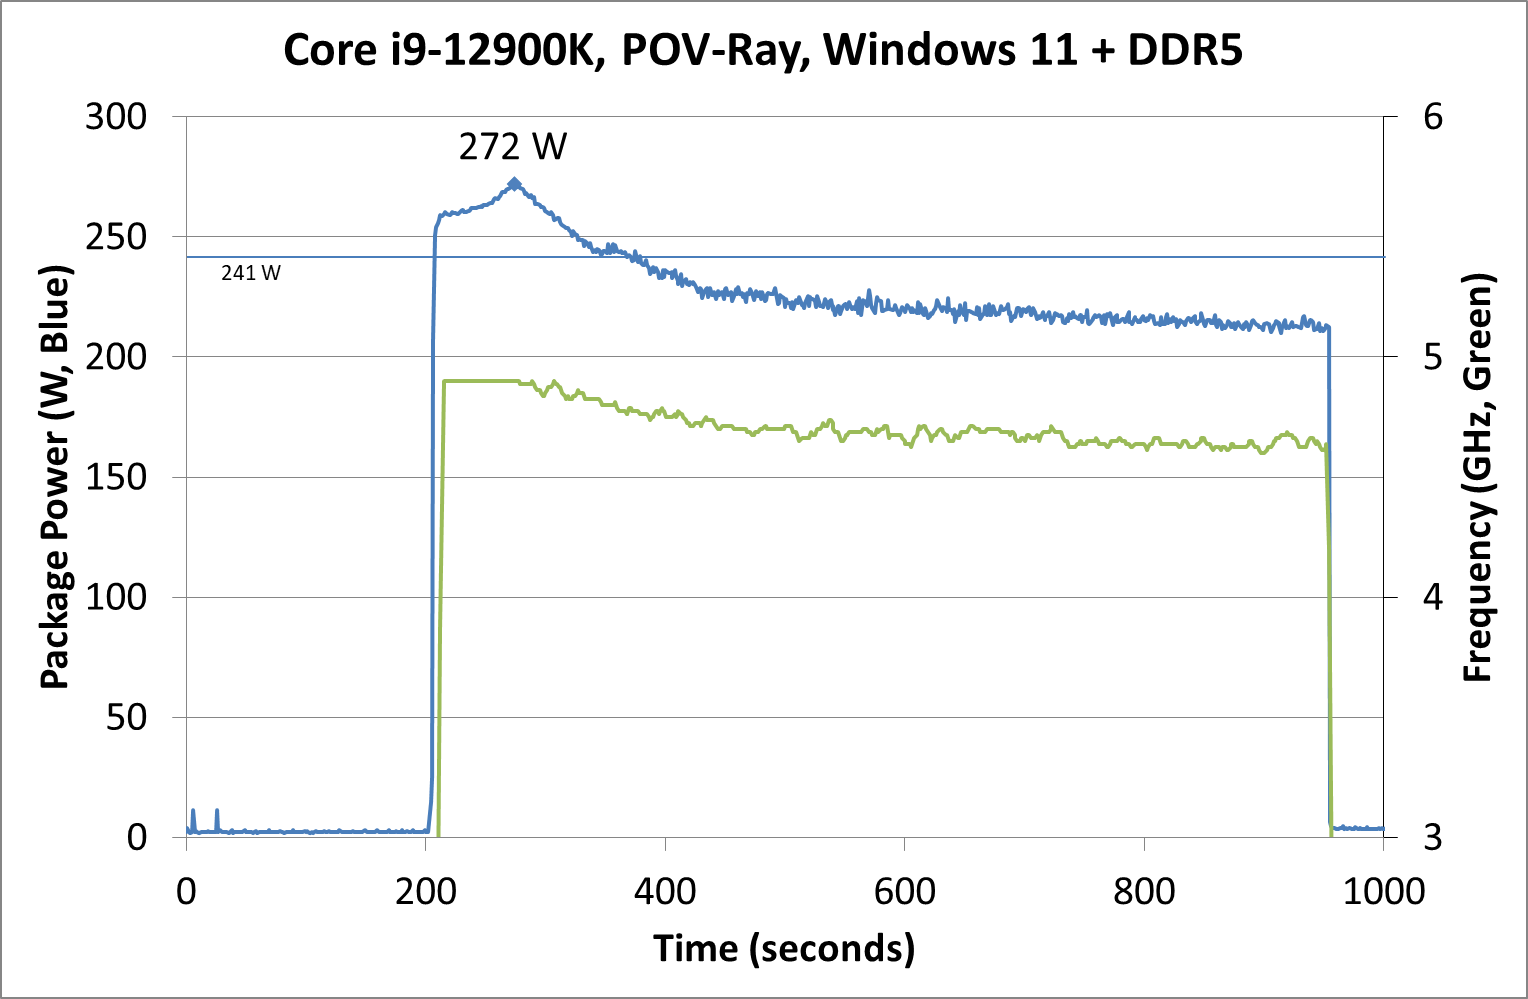 Power%2012900K%20POVRay%20Win11%20DDR5.png